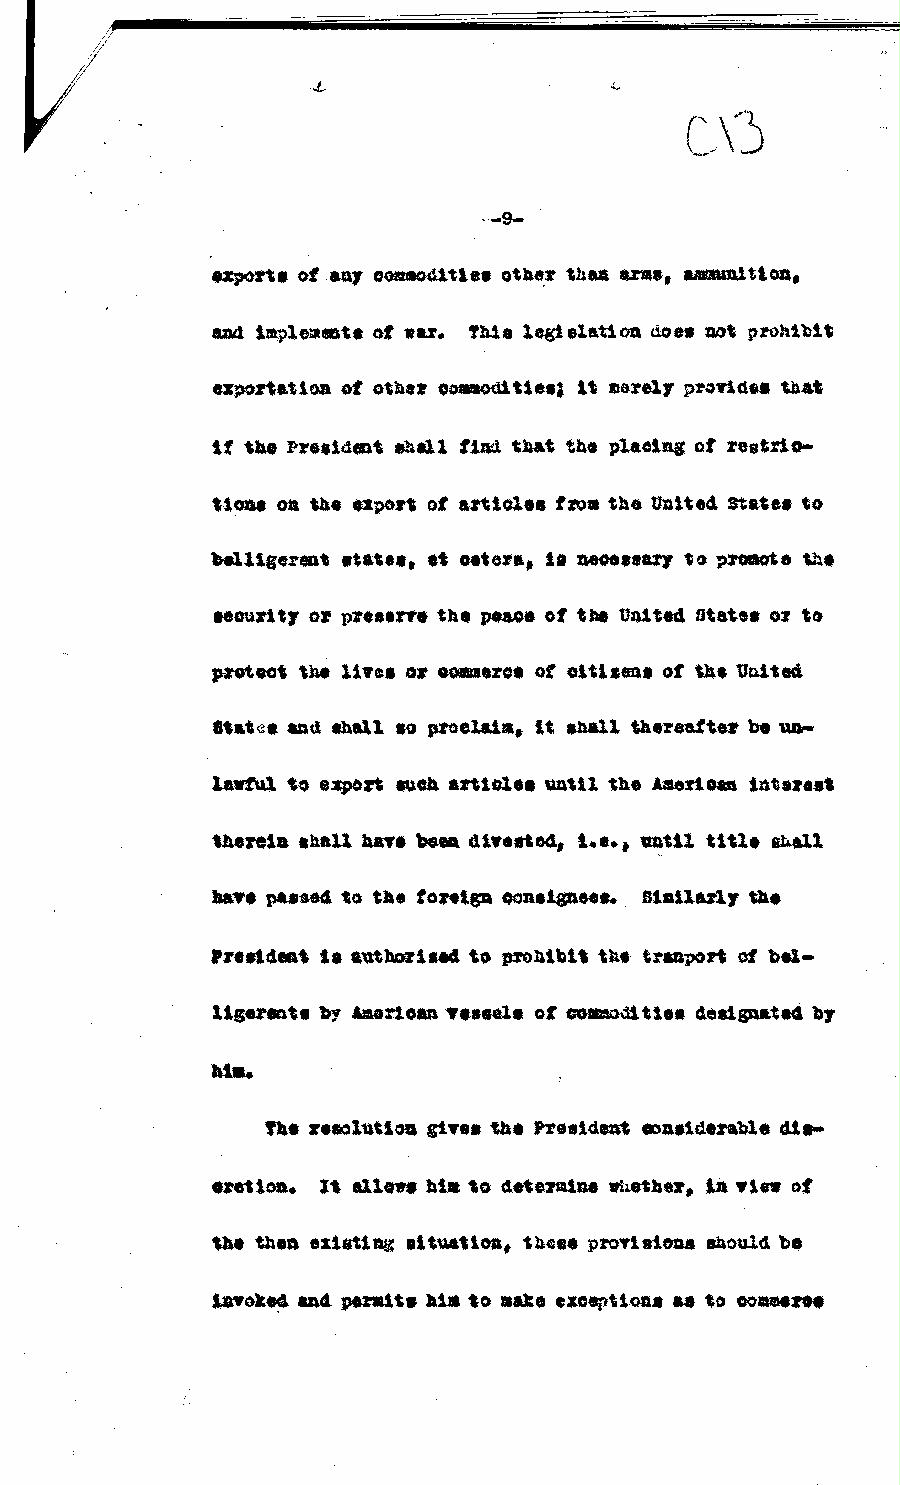 [a303c13.jpg] - Cont-memo from Dept. of State5/28/37